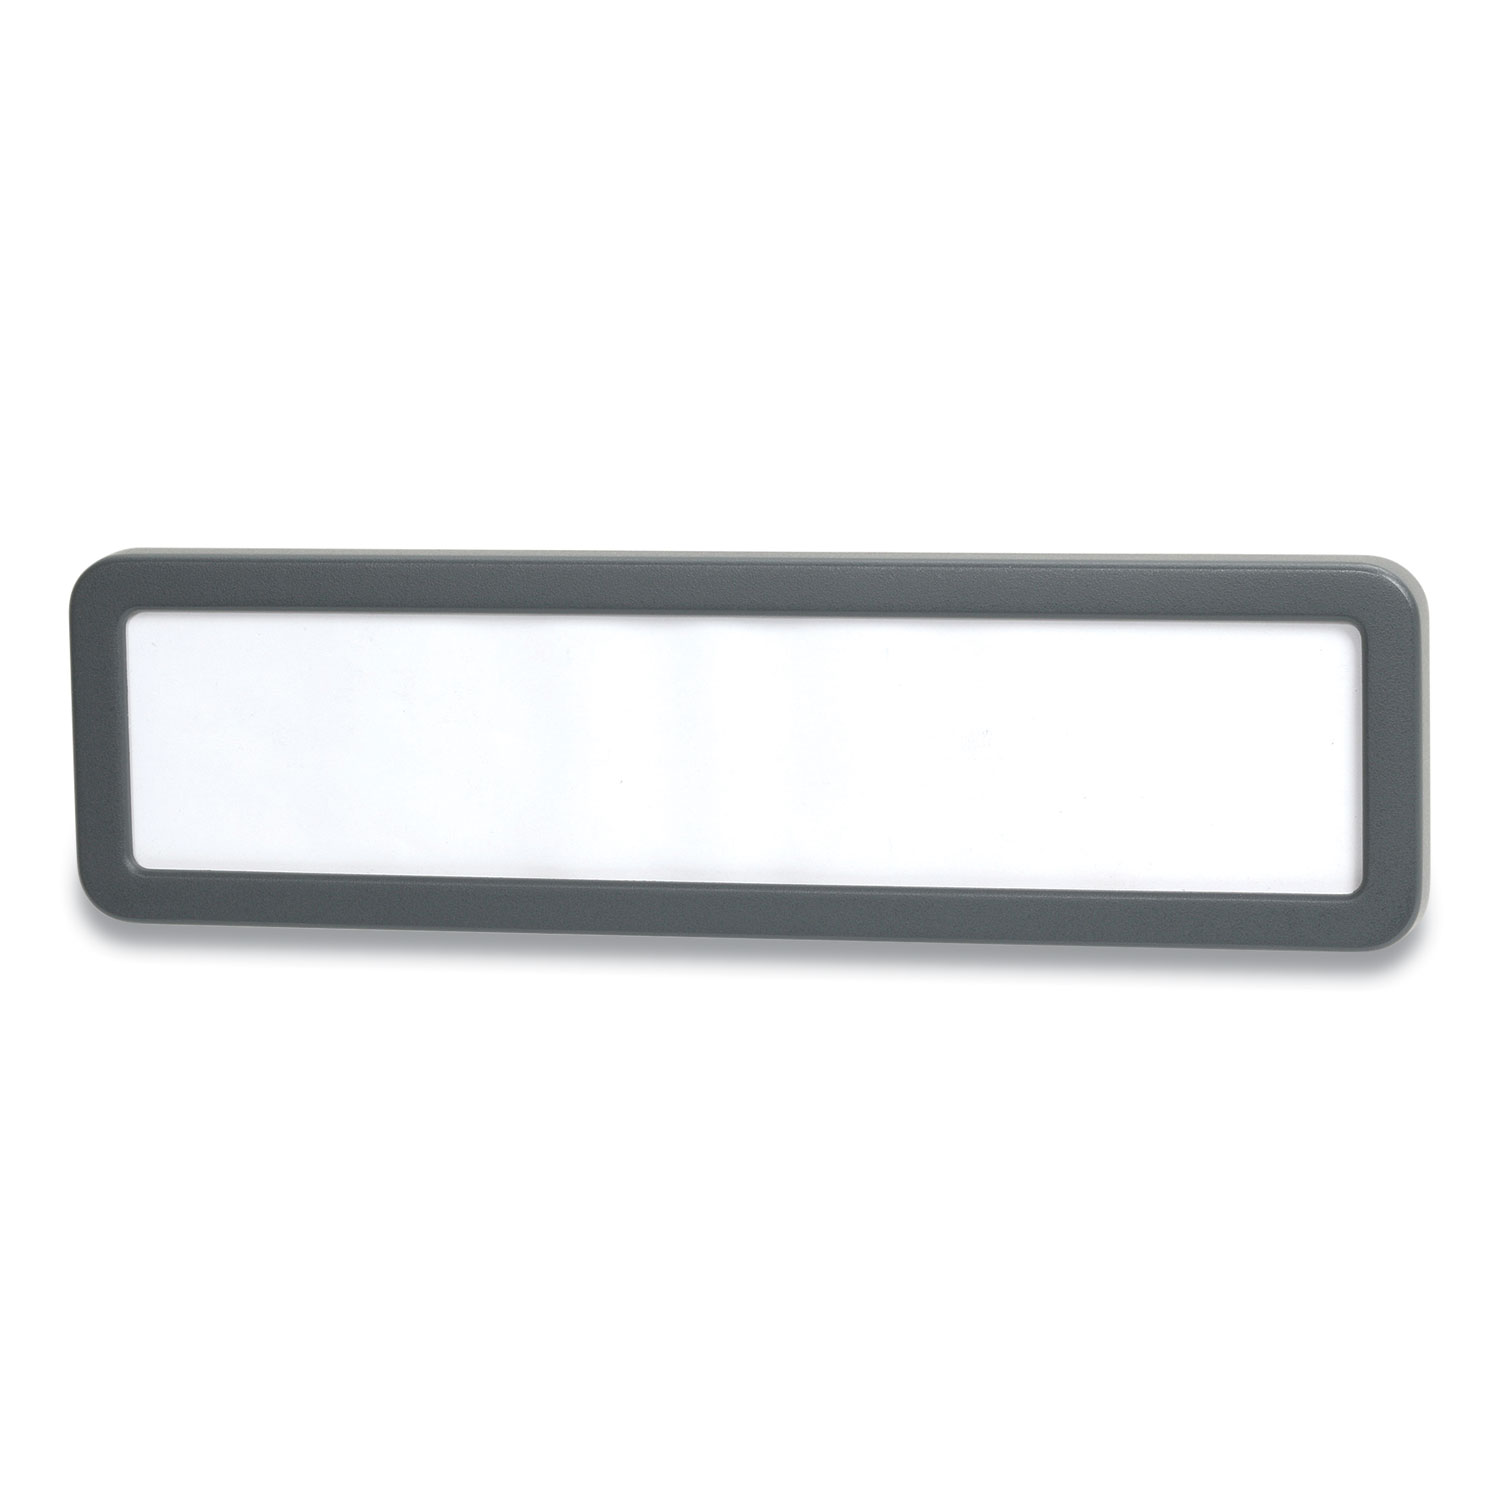 Officemate Verticalmate Plastic Name Plate, 9.25 x 0.88 x 2.63, Gray